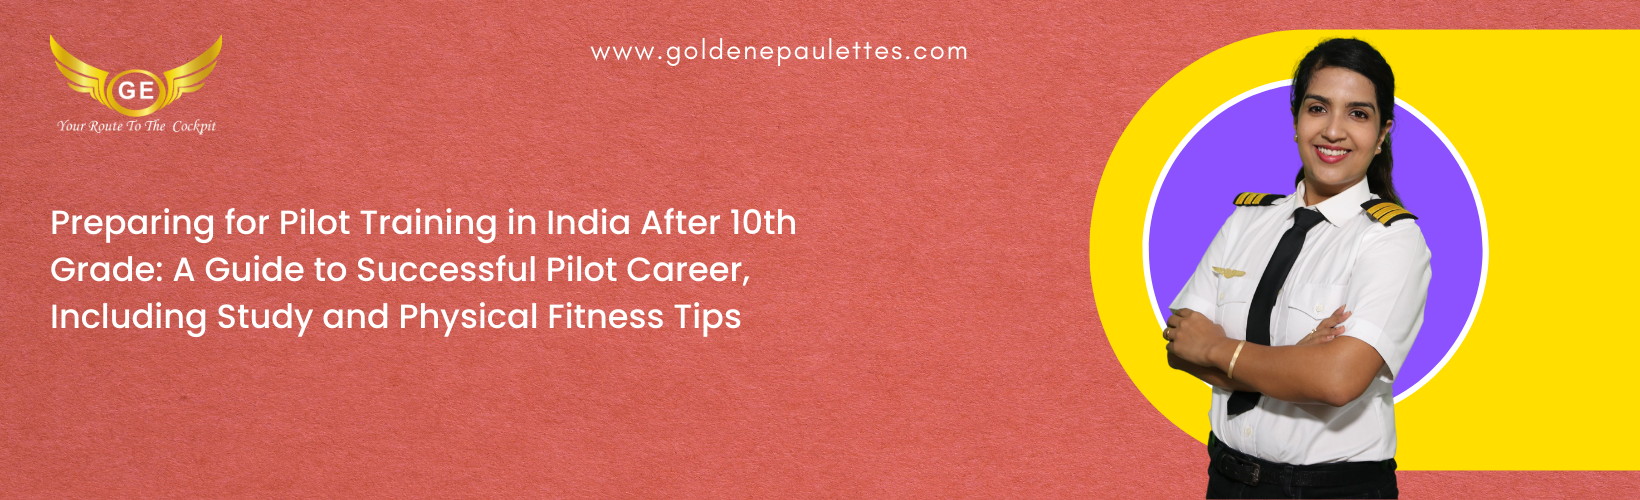 How to Prepare for a Pilot Training Program After 10th Grade in India